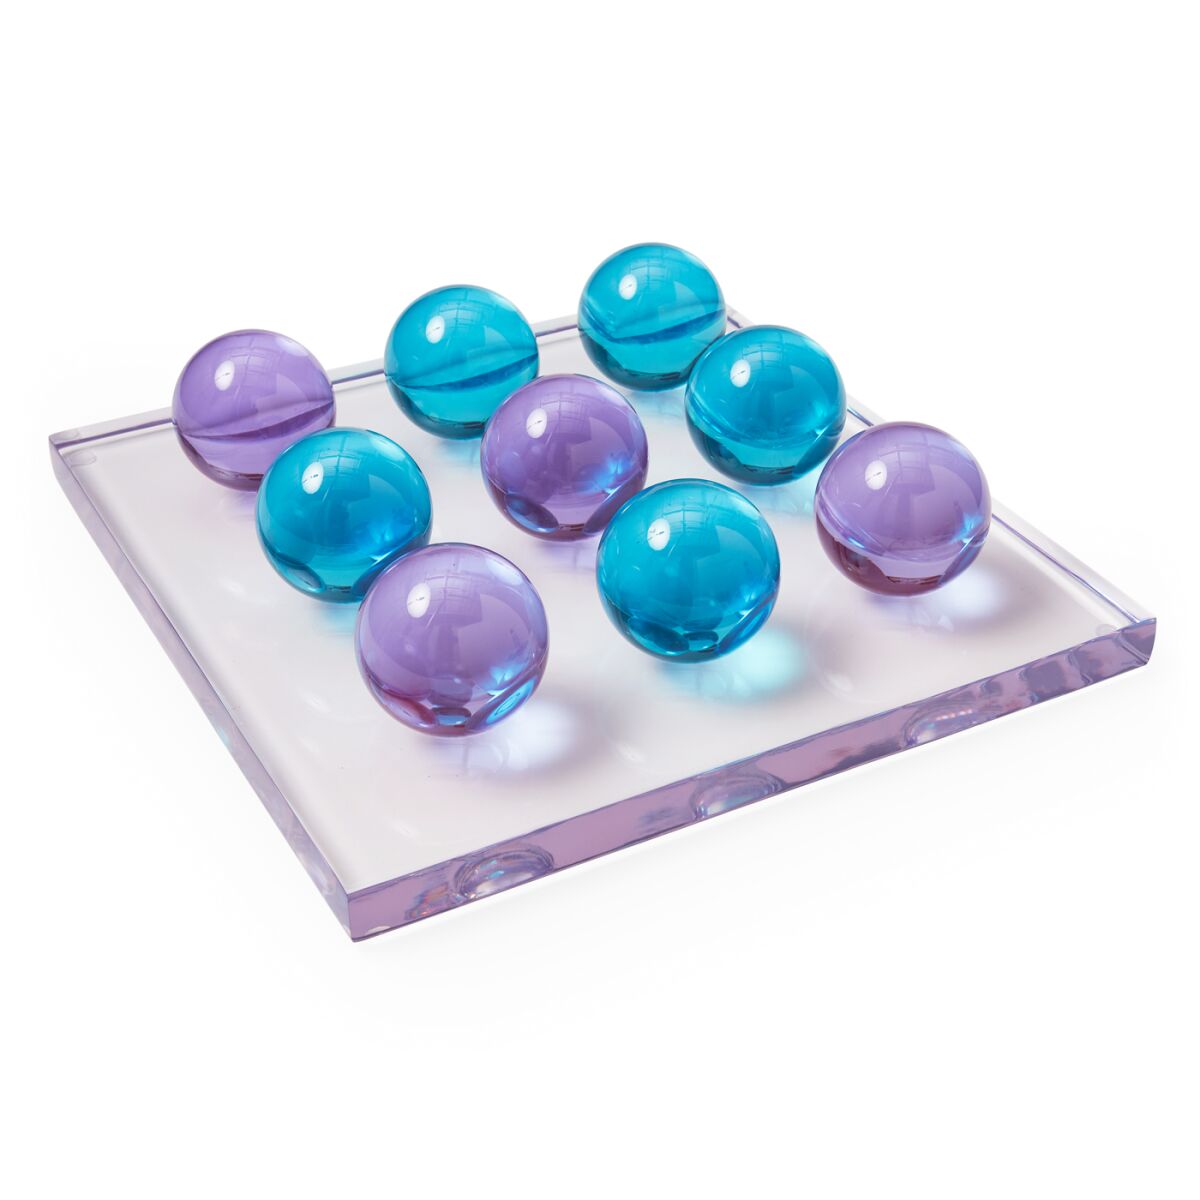 Turquoise and purple playing pieces on a thick slab of clear acrylic. 